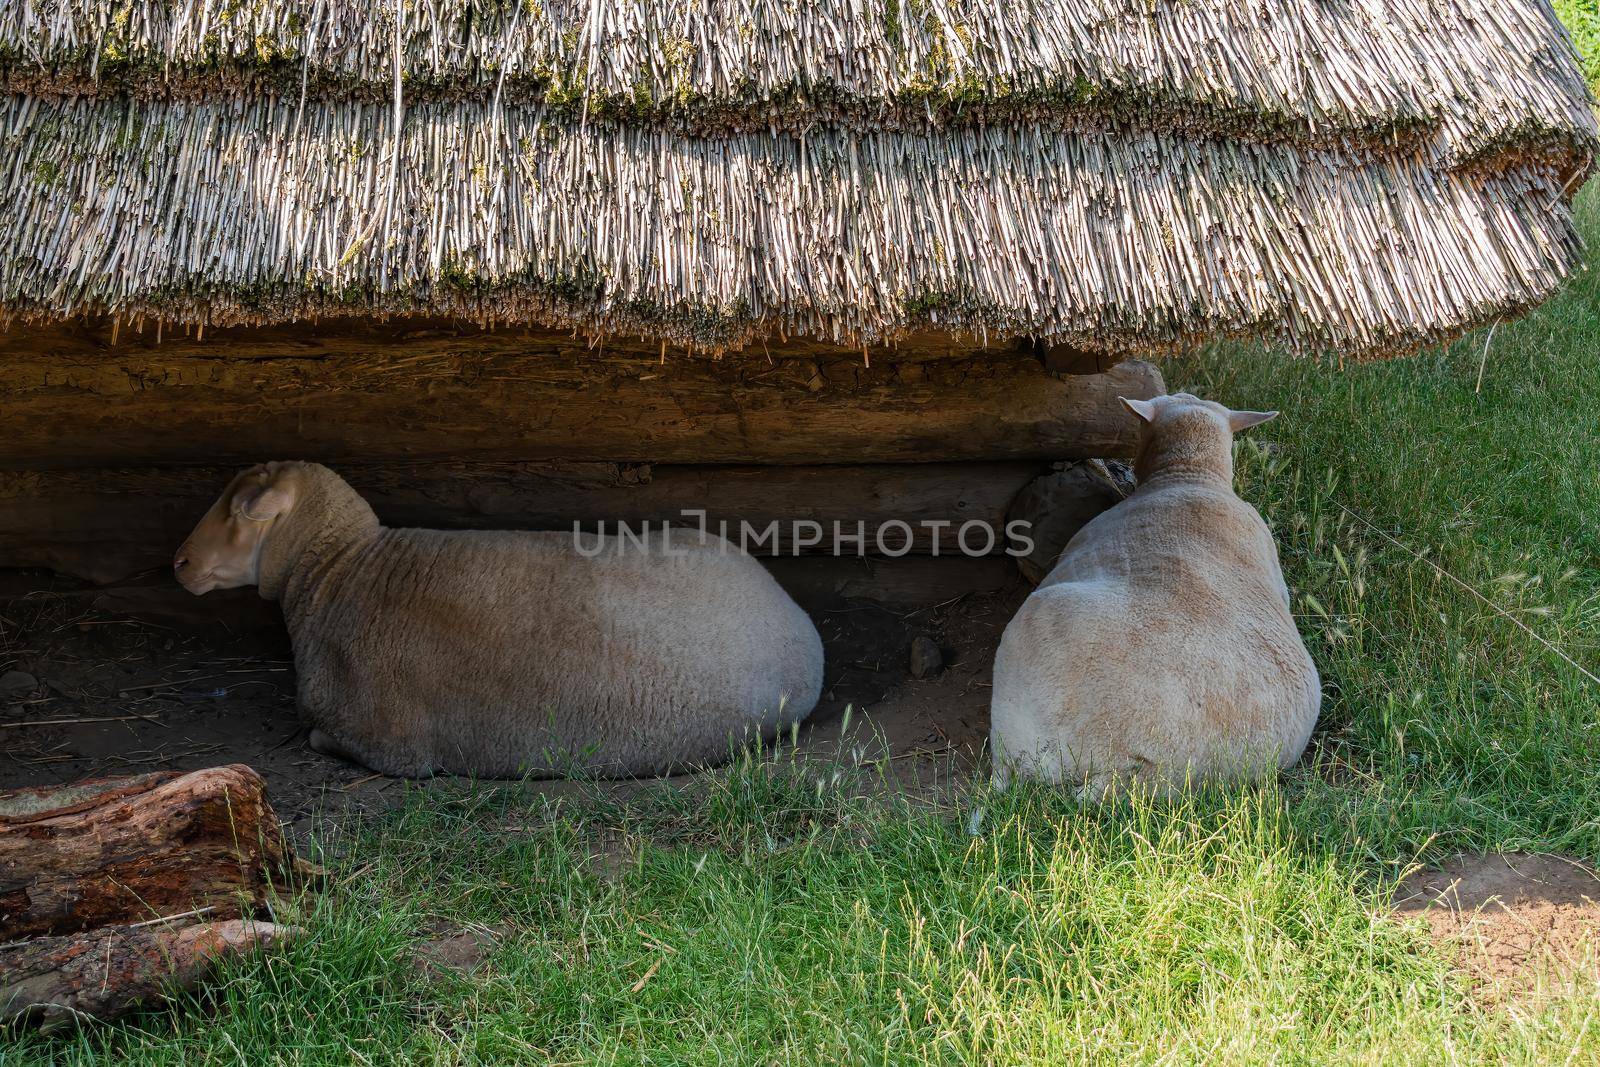 Museum of Great Moravia Modra, loose sheep. Sheep resting under a thatched roof